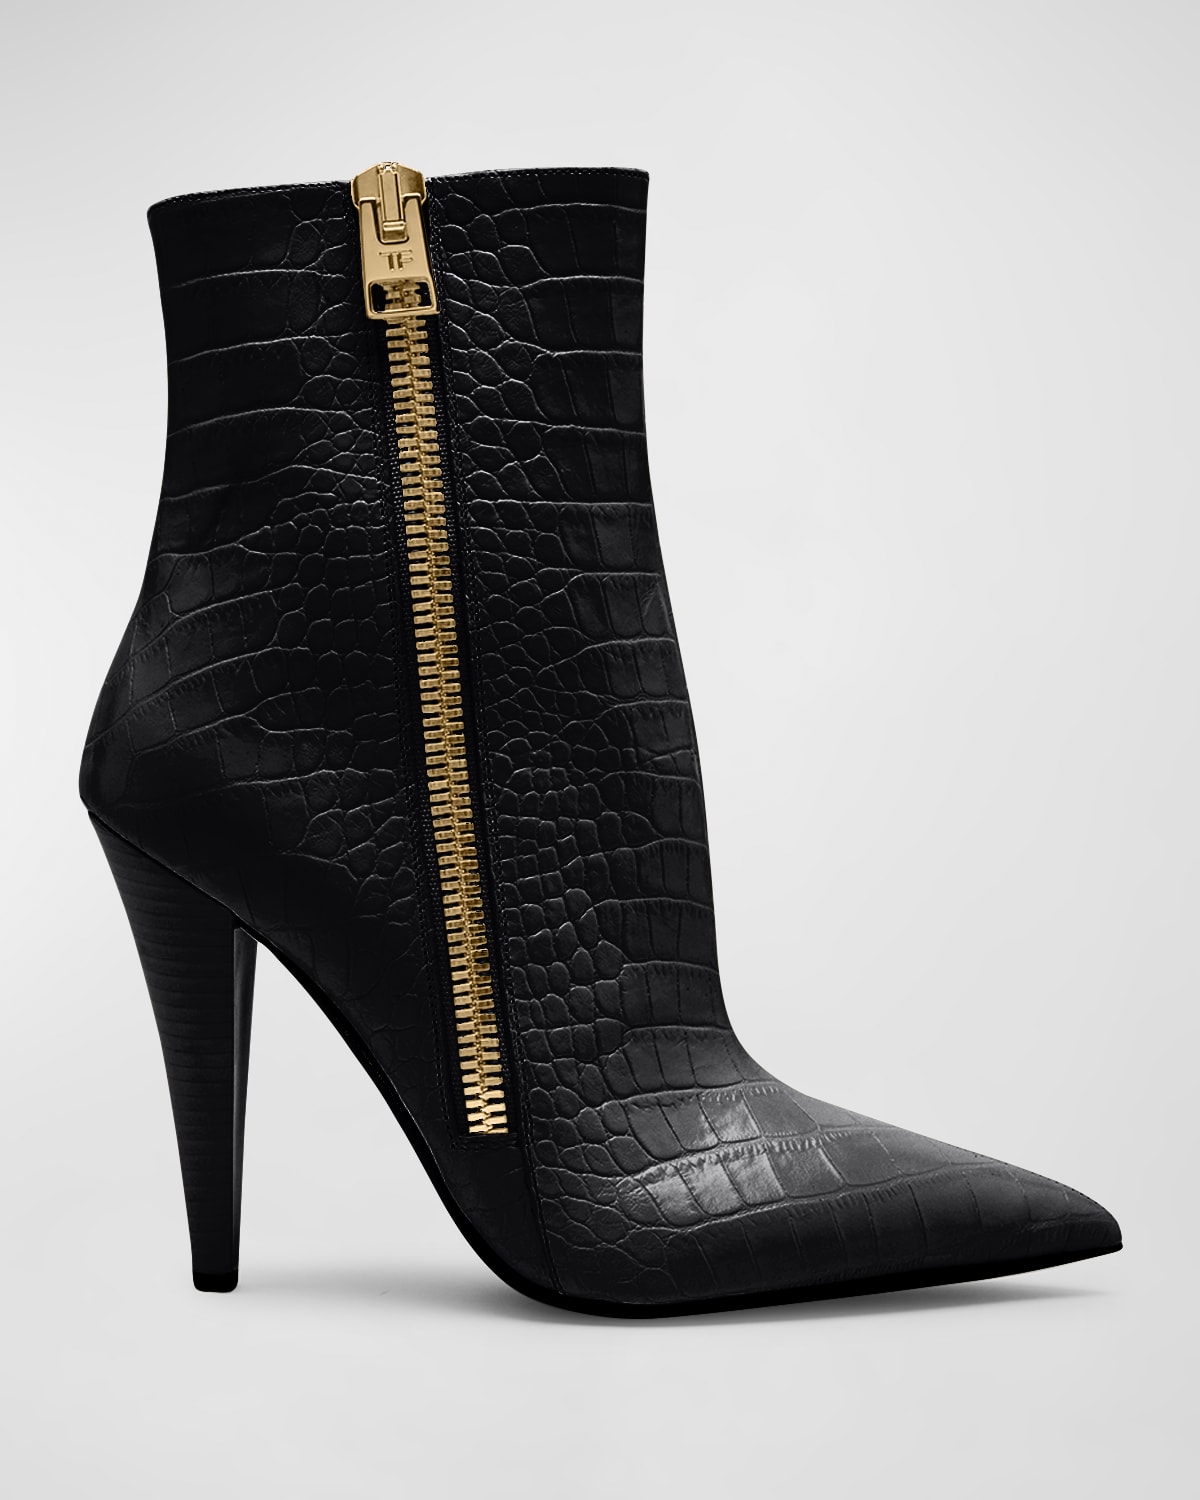 TOM FORD CROCO ZIP STILETTO ANKLE BOOTS